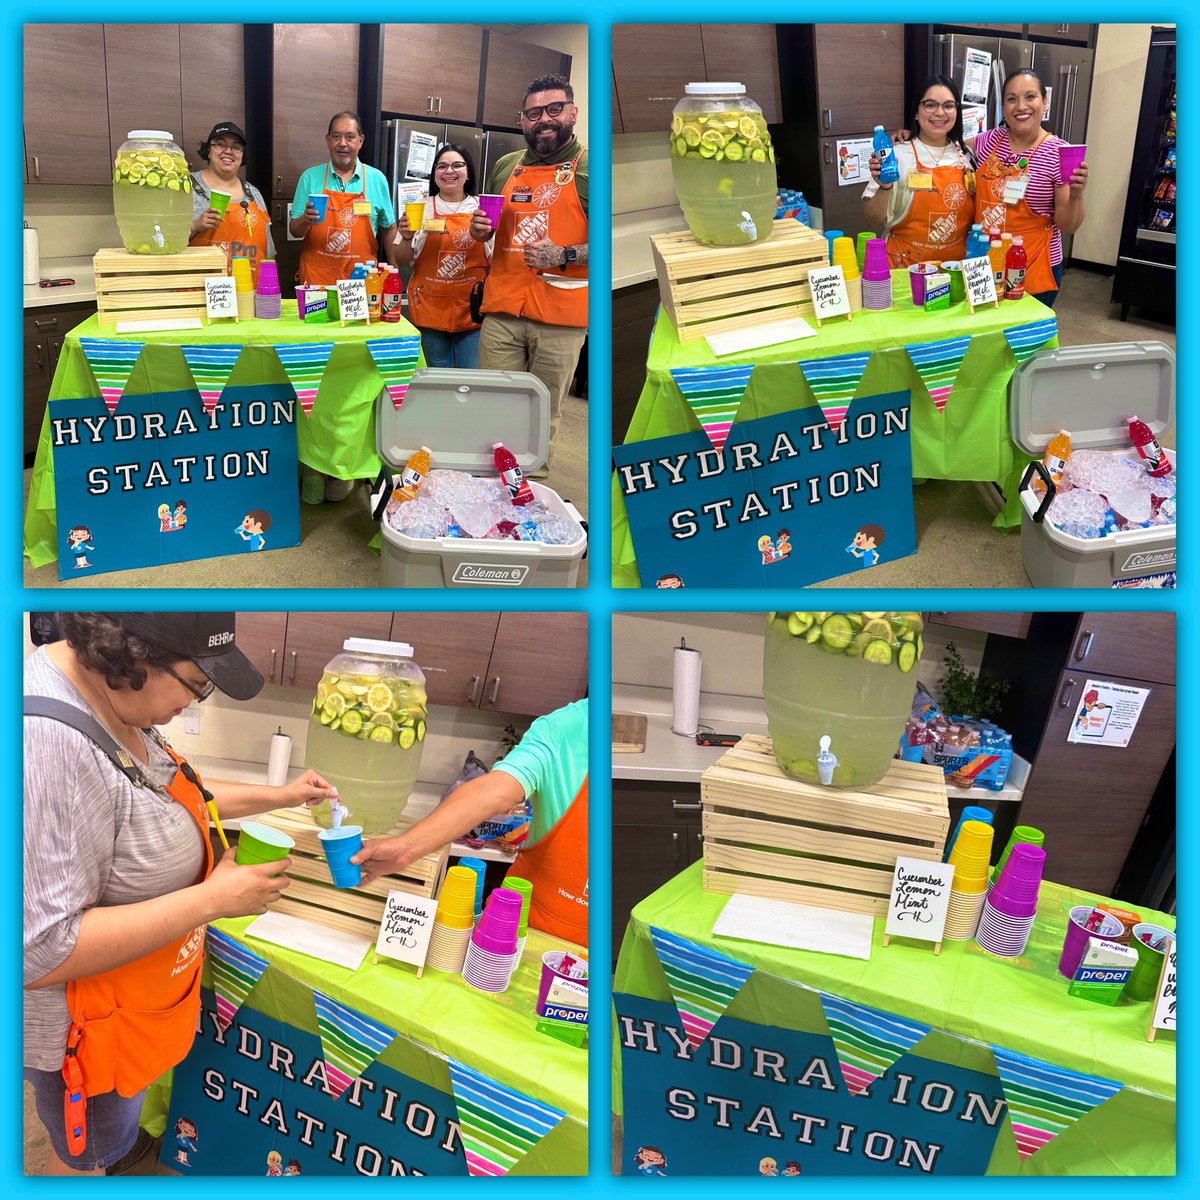 Taking care of our associates during this hot weather with our very own #HydrationStation!! The Cucumber+Lemon+Mint water was a hit! Enjoy and remember to stay hydrated!! #LivingOurValues #TakingCareOfOurPeople
#SafetyTakesEveryone